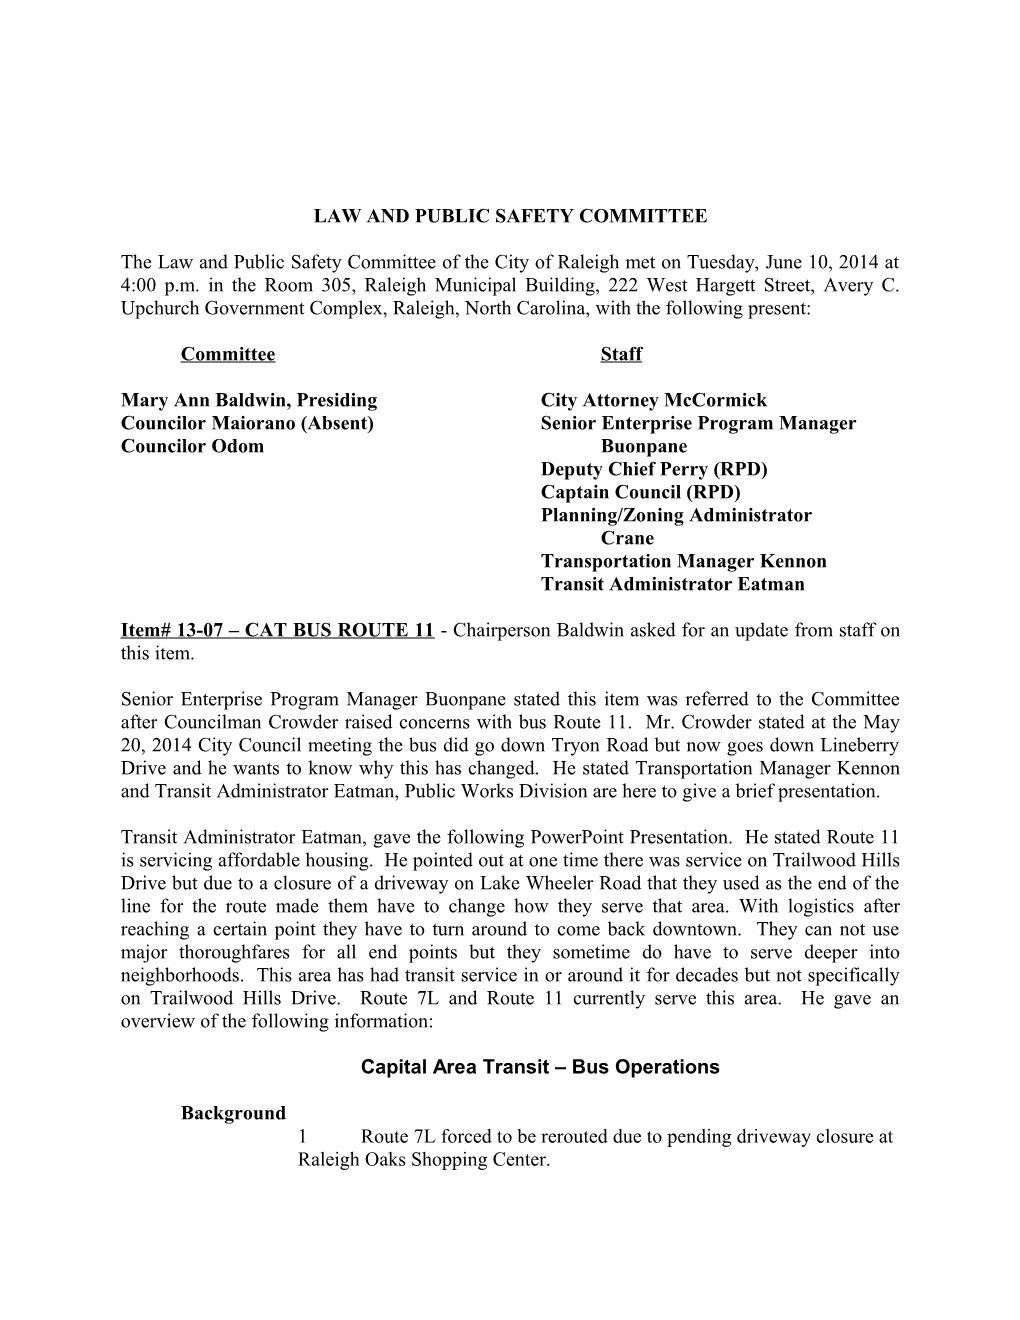 Law and Public Safety Committee Minutes - 06/10/2014